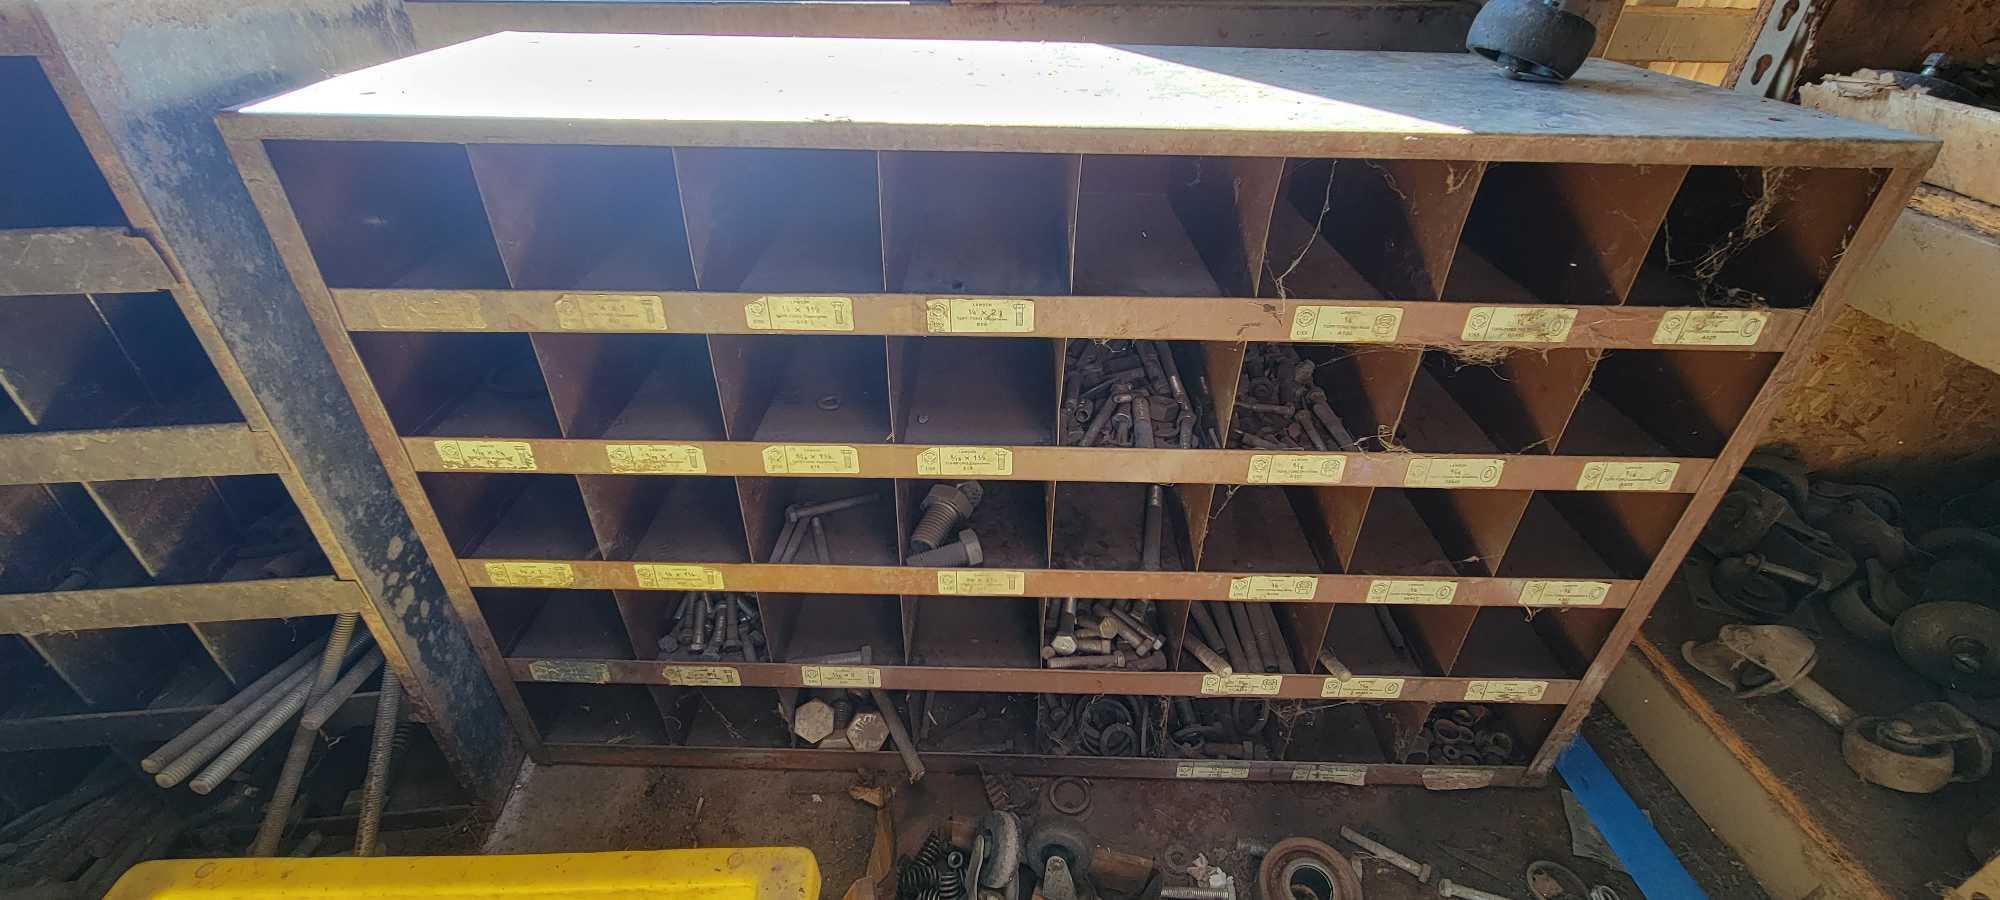 Shelving Contents, Tons of Hydraulic Components, Seals and Gaskets, Materials